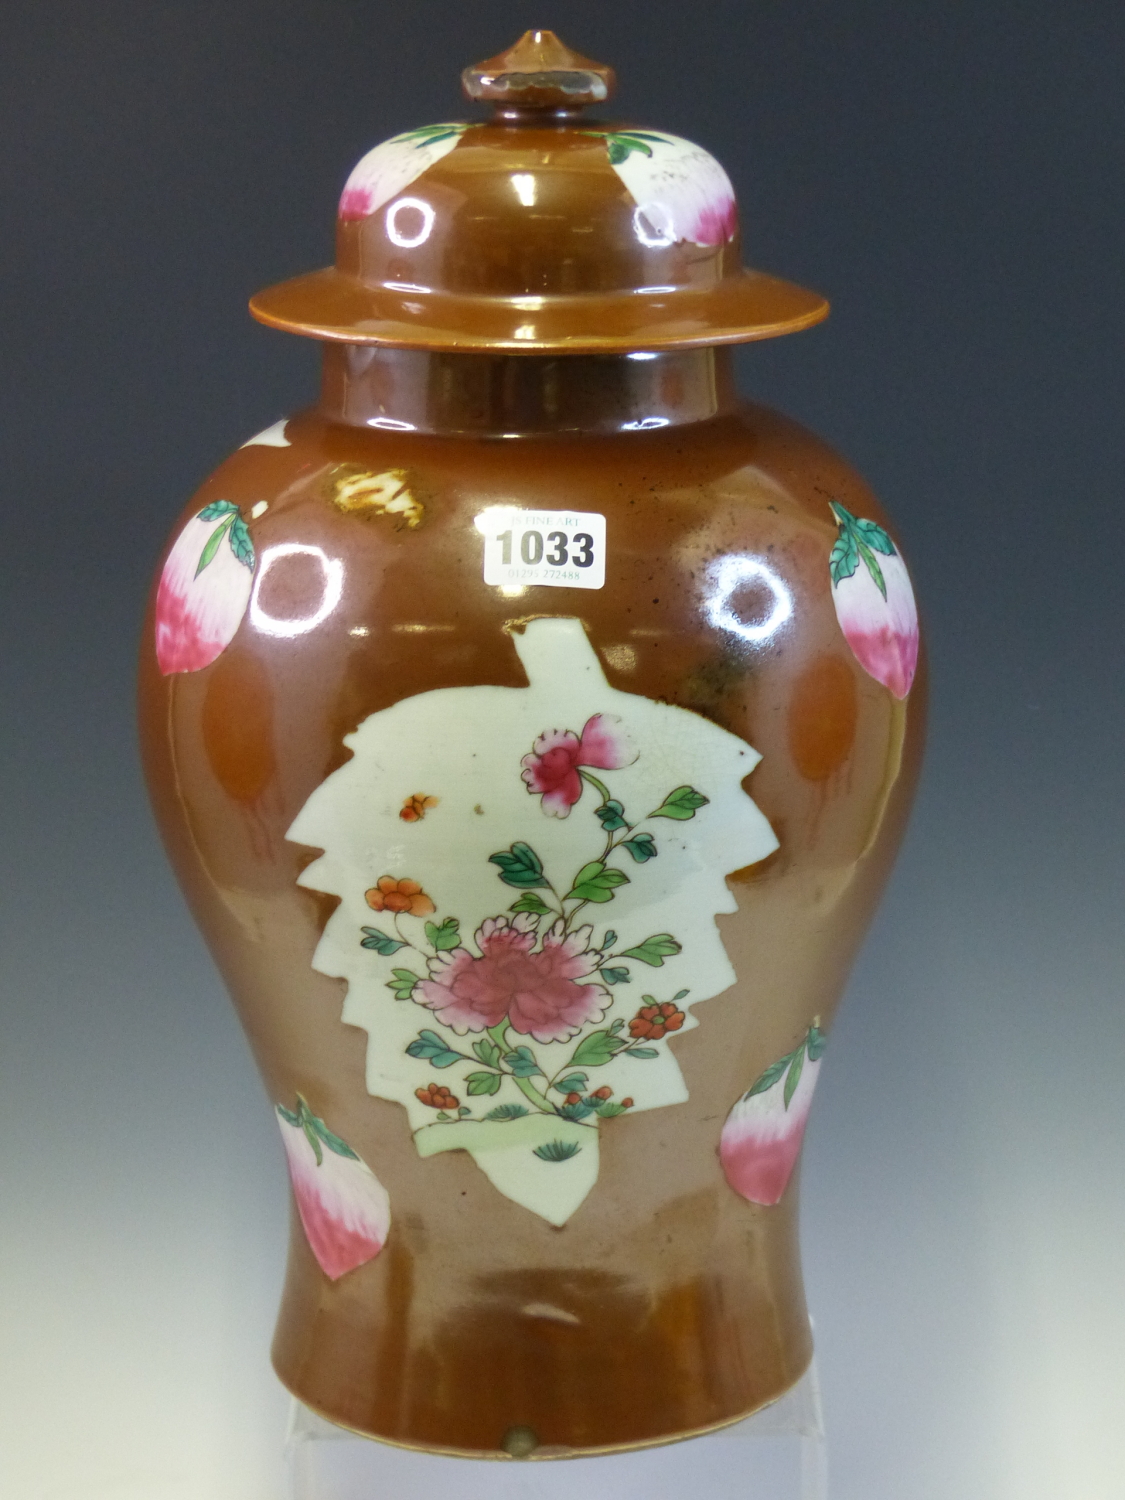 A CHINESE BALUSTER VASE AND COVER PAINTED IN FAMILLE ROSE ENAMELS WITH PEACHES AND LEAF SHAPED